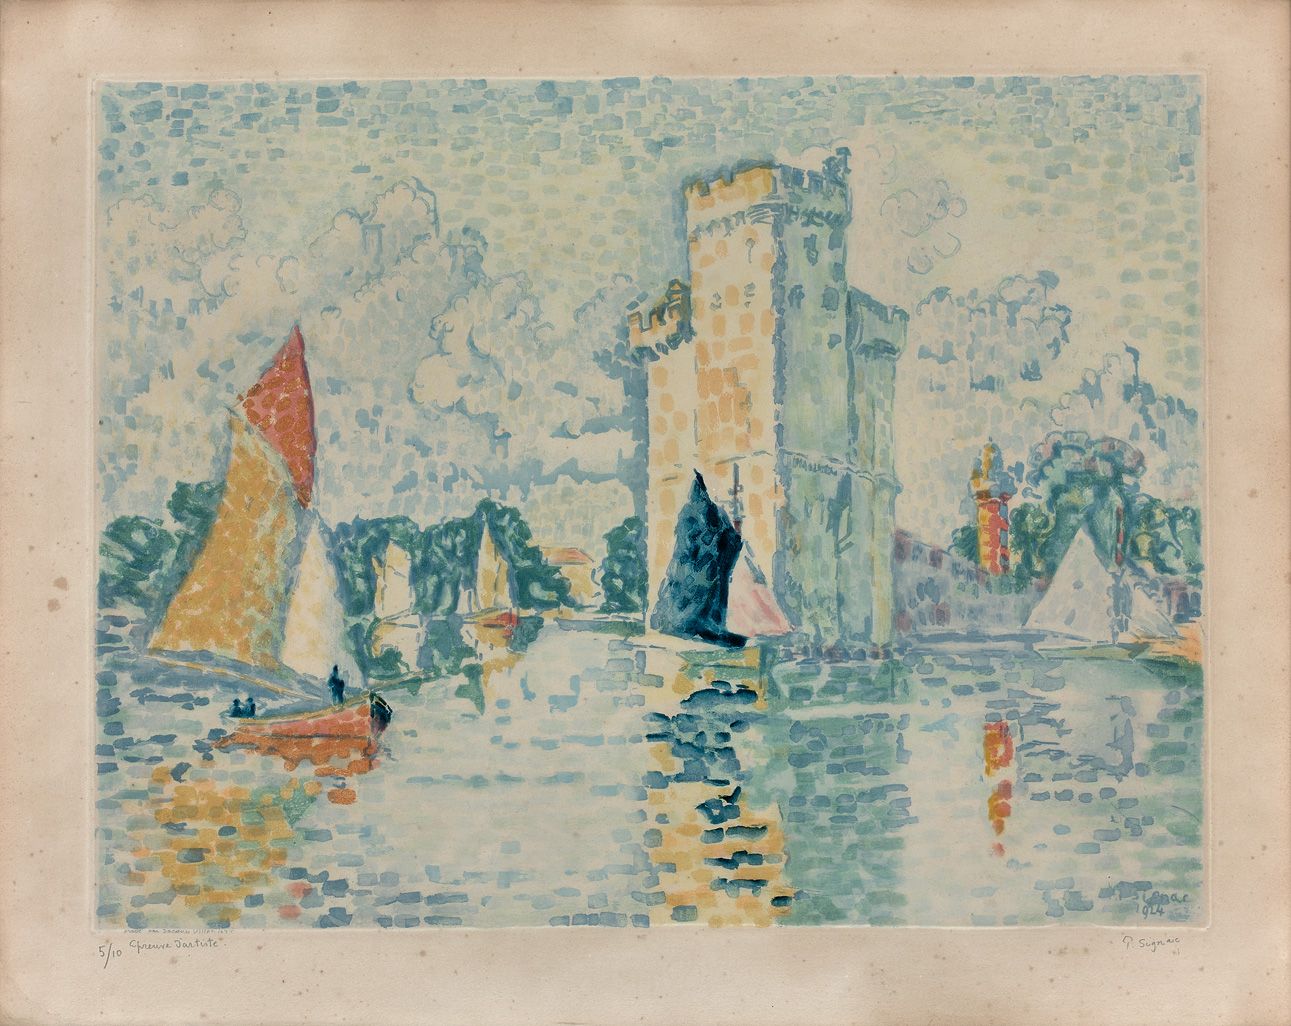 Null Jacques VILLON (1875-1963), after Signac

The entrance to the port of La Ro&hellip;